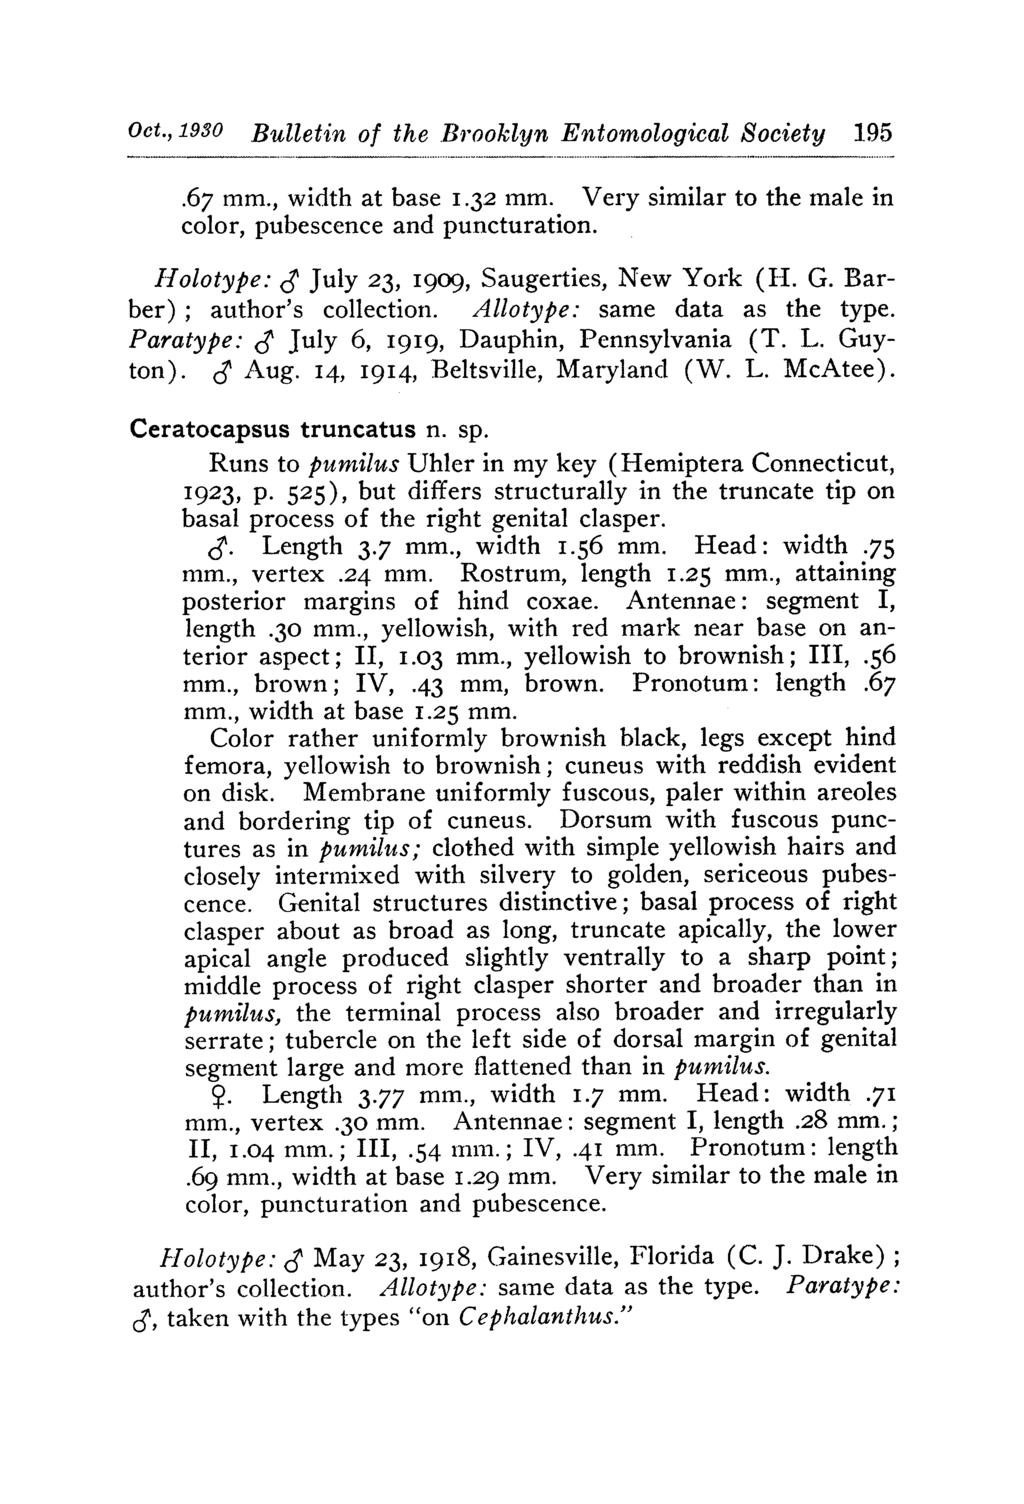 ... _... Oct. 1930 Bulletin of the Brooklyn Entomological Society 195.....67 mm., width at base I.32 mm. Very similar to the male in color, pubescence and puncturation.